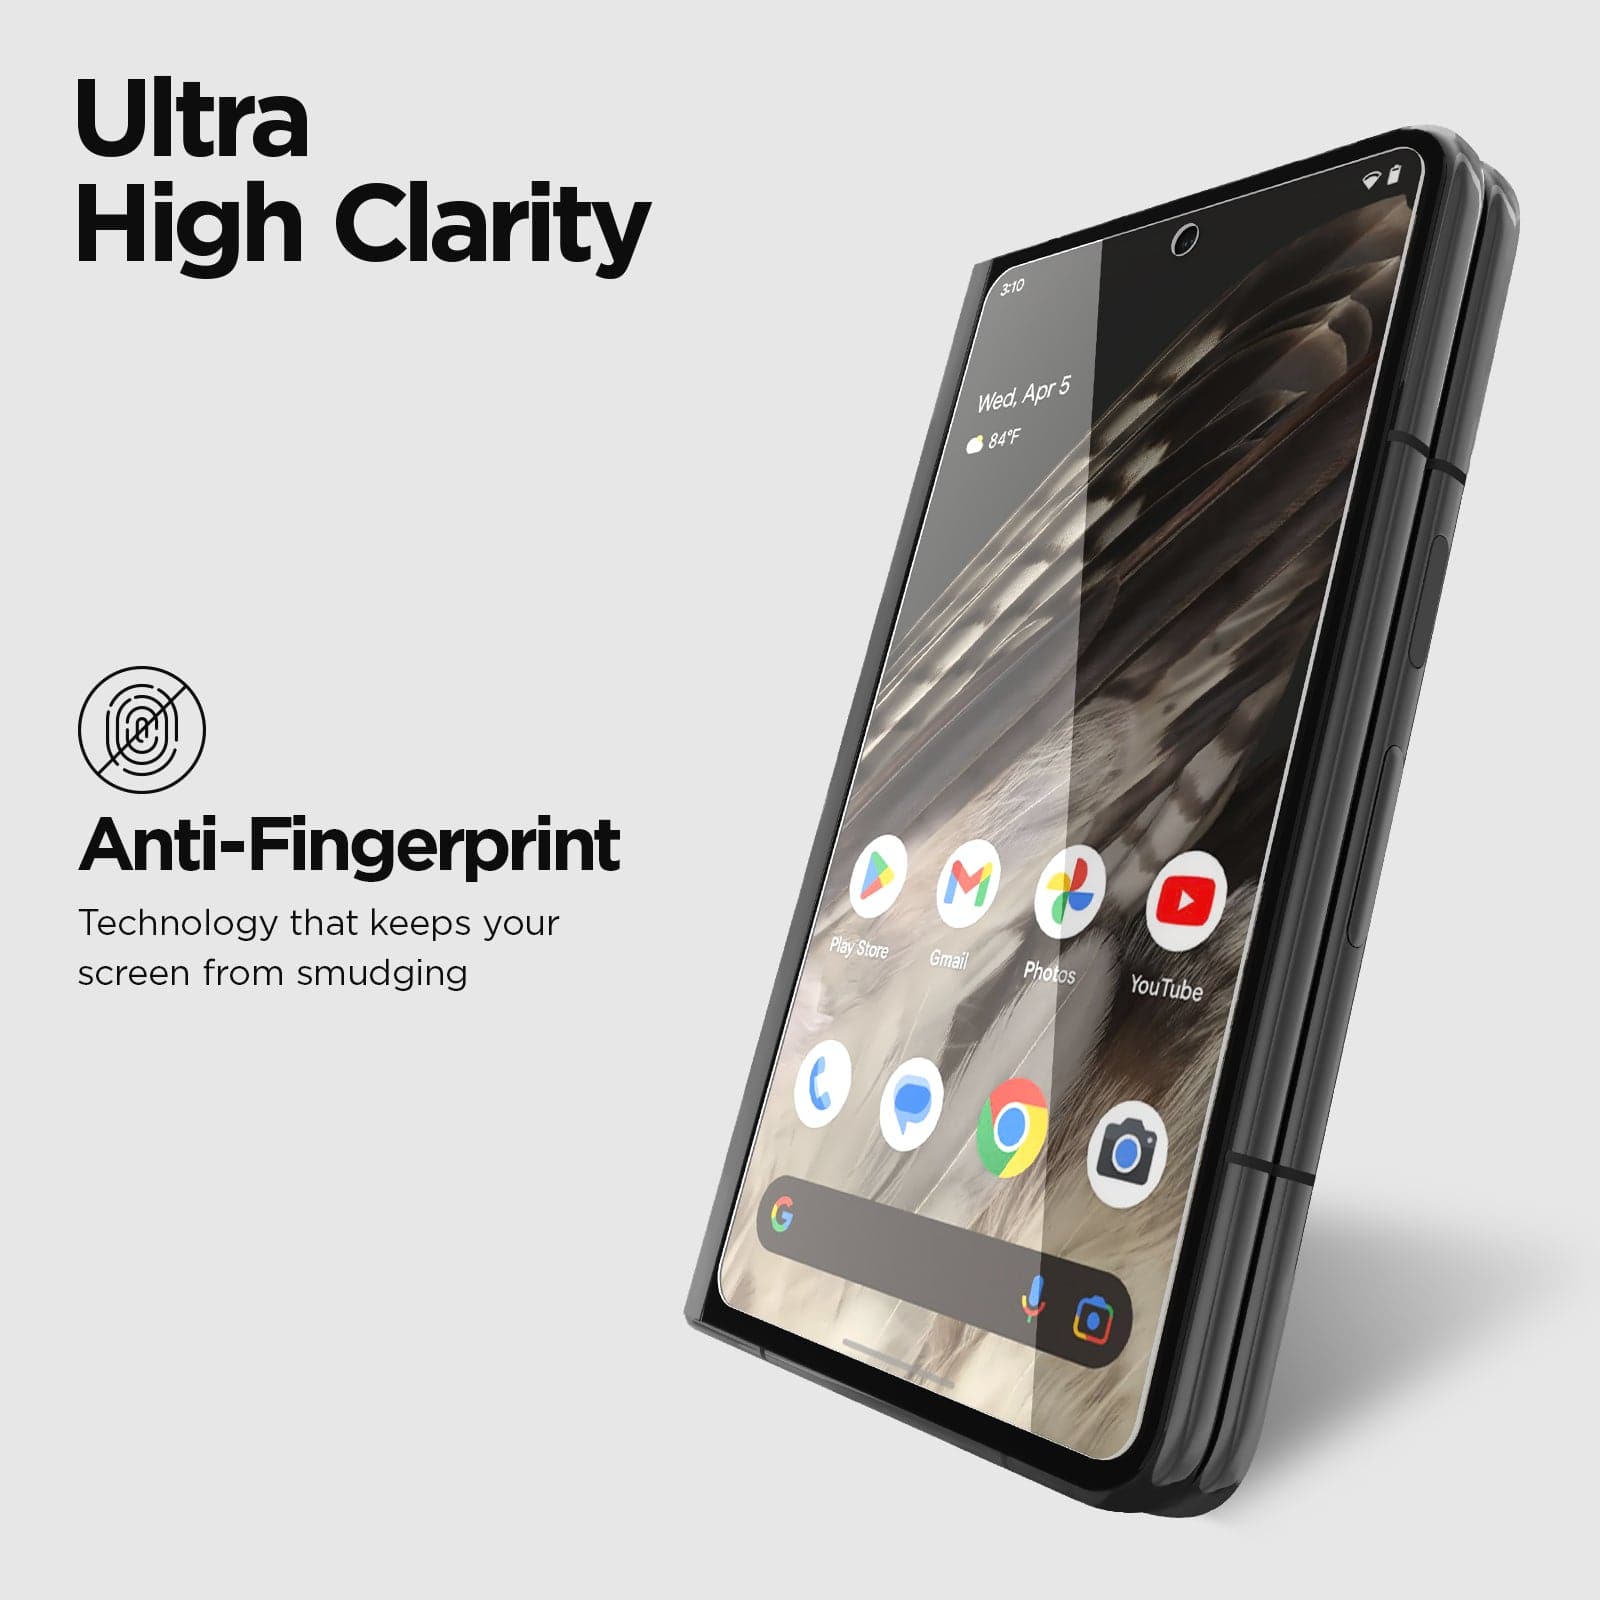 ULTRA HIGH CLARITY. ANTI-FINGERPRINT TECHNOLOGY KEEPS YOUR SCREEN FROM SMUDGING. 